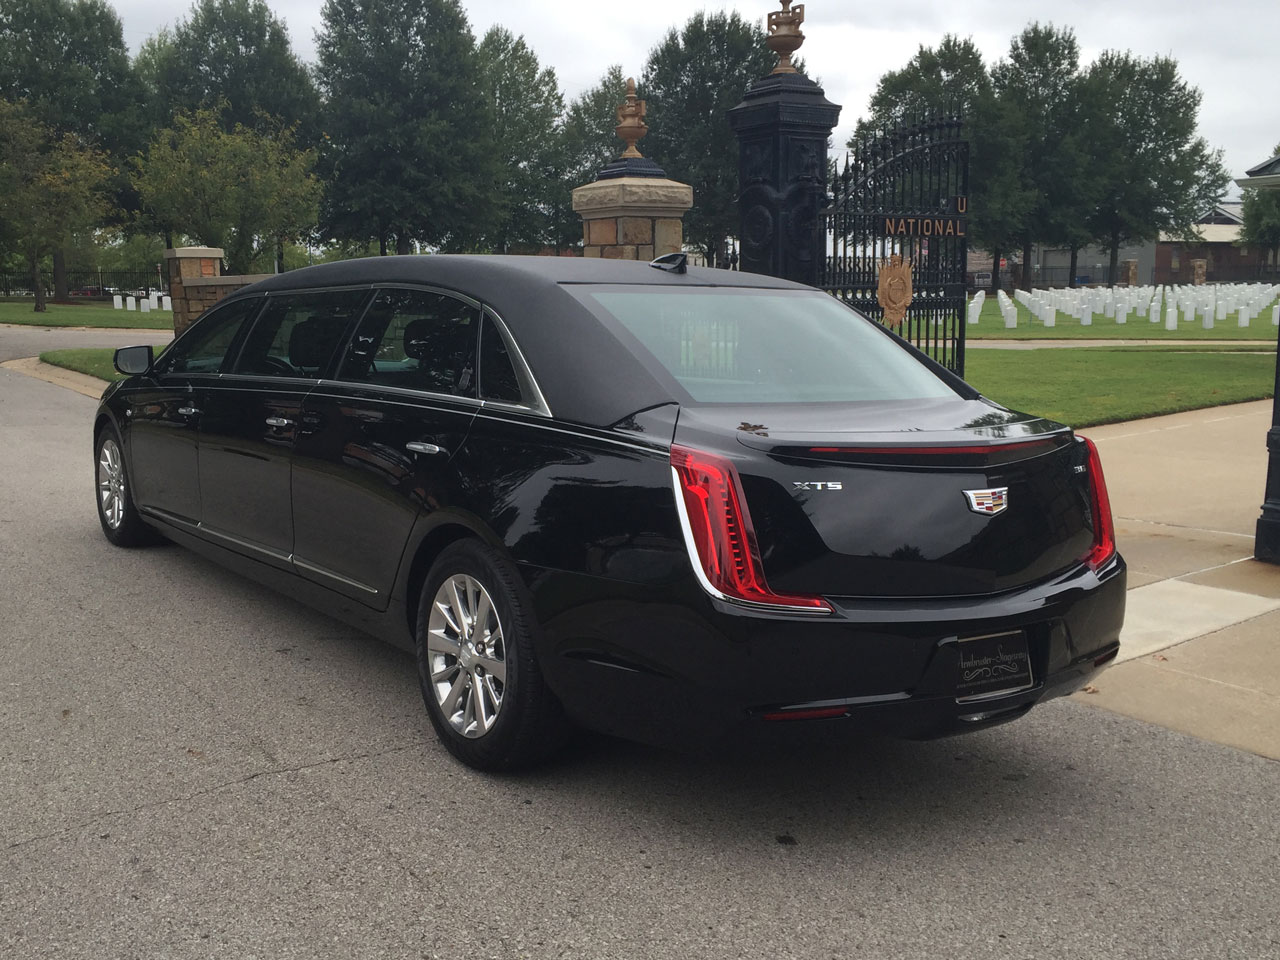 2019 Armbruster Stageway Cadillac L6 52 Stretch Limousine 9